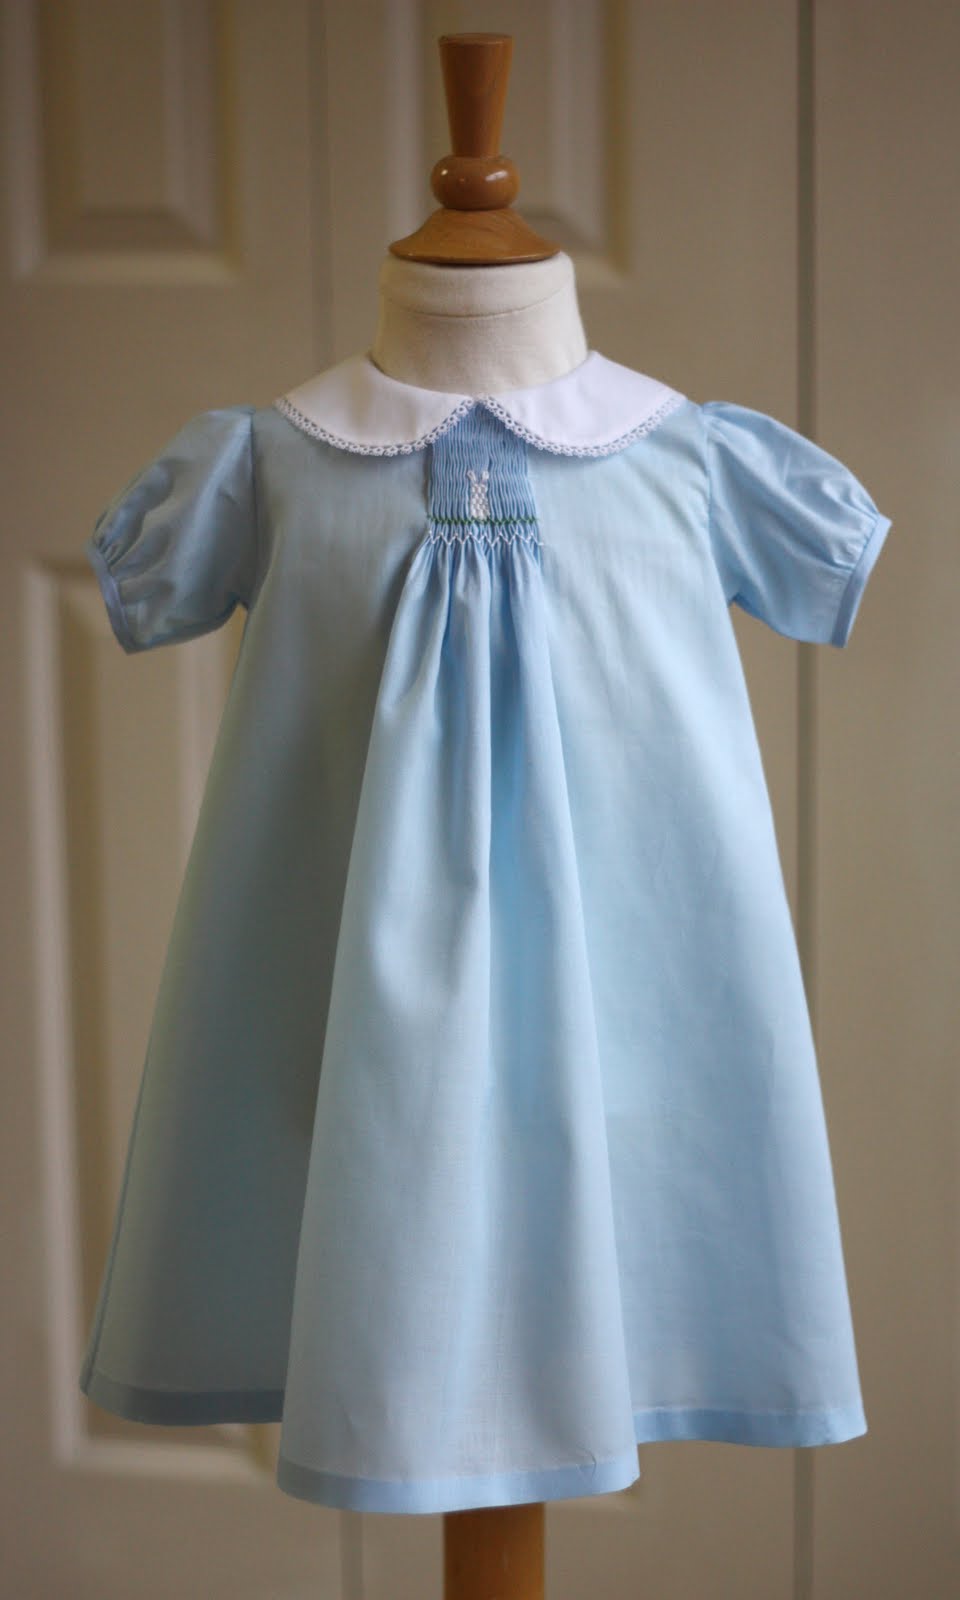 Creations By Michie` Blog: Baby Daygown With Center Smocking